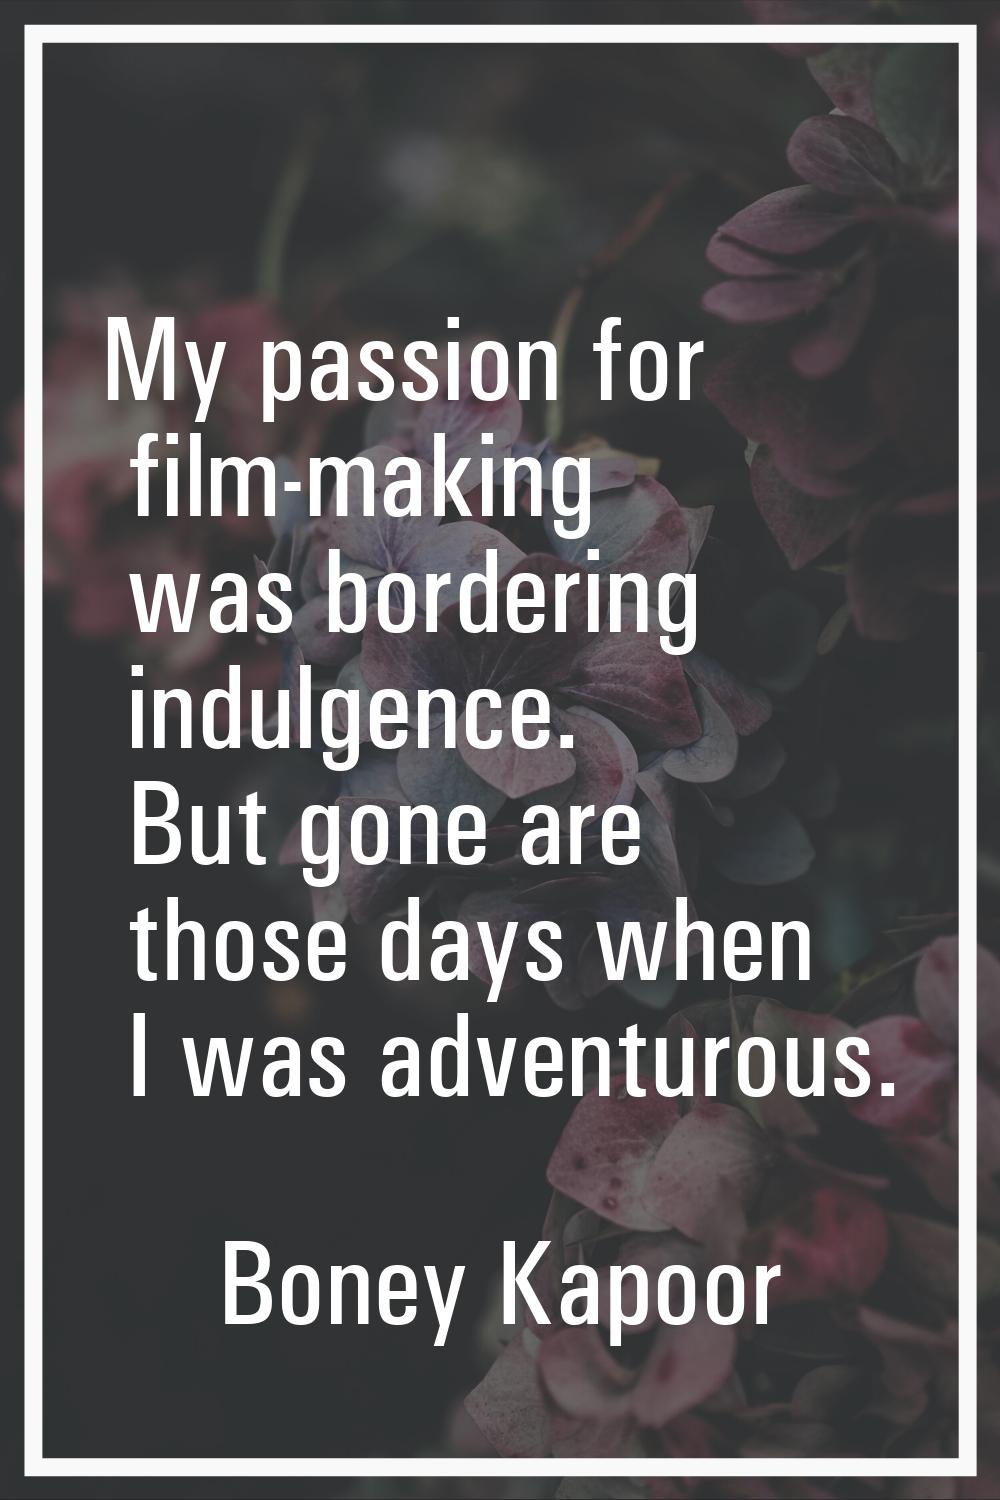 My passion for film-making was bordering indulgence. But gone are those days when I was adventurous